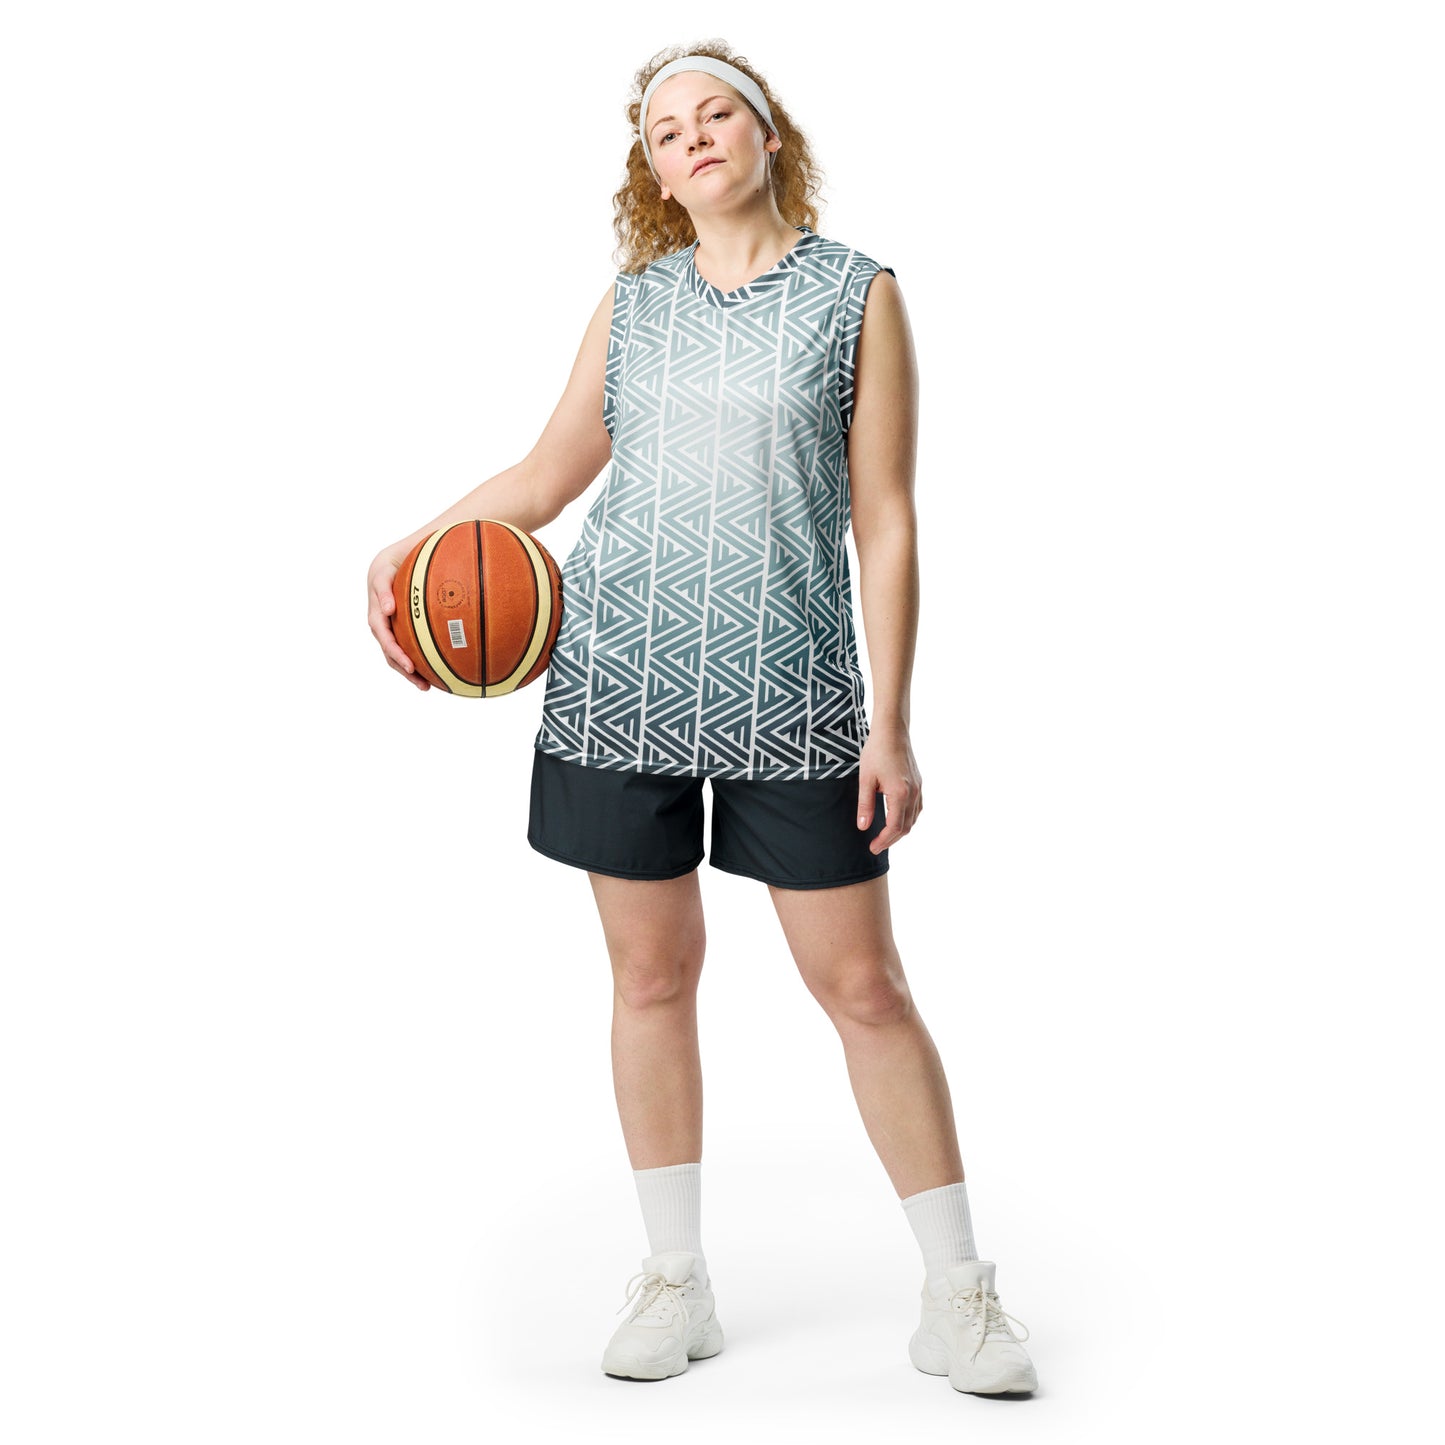 FV Recycled Teal unisex basketball jersey